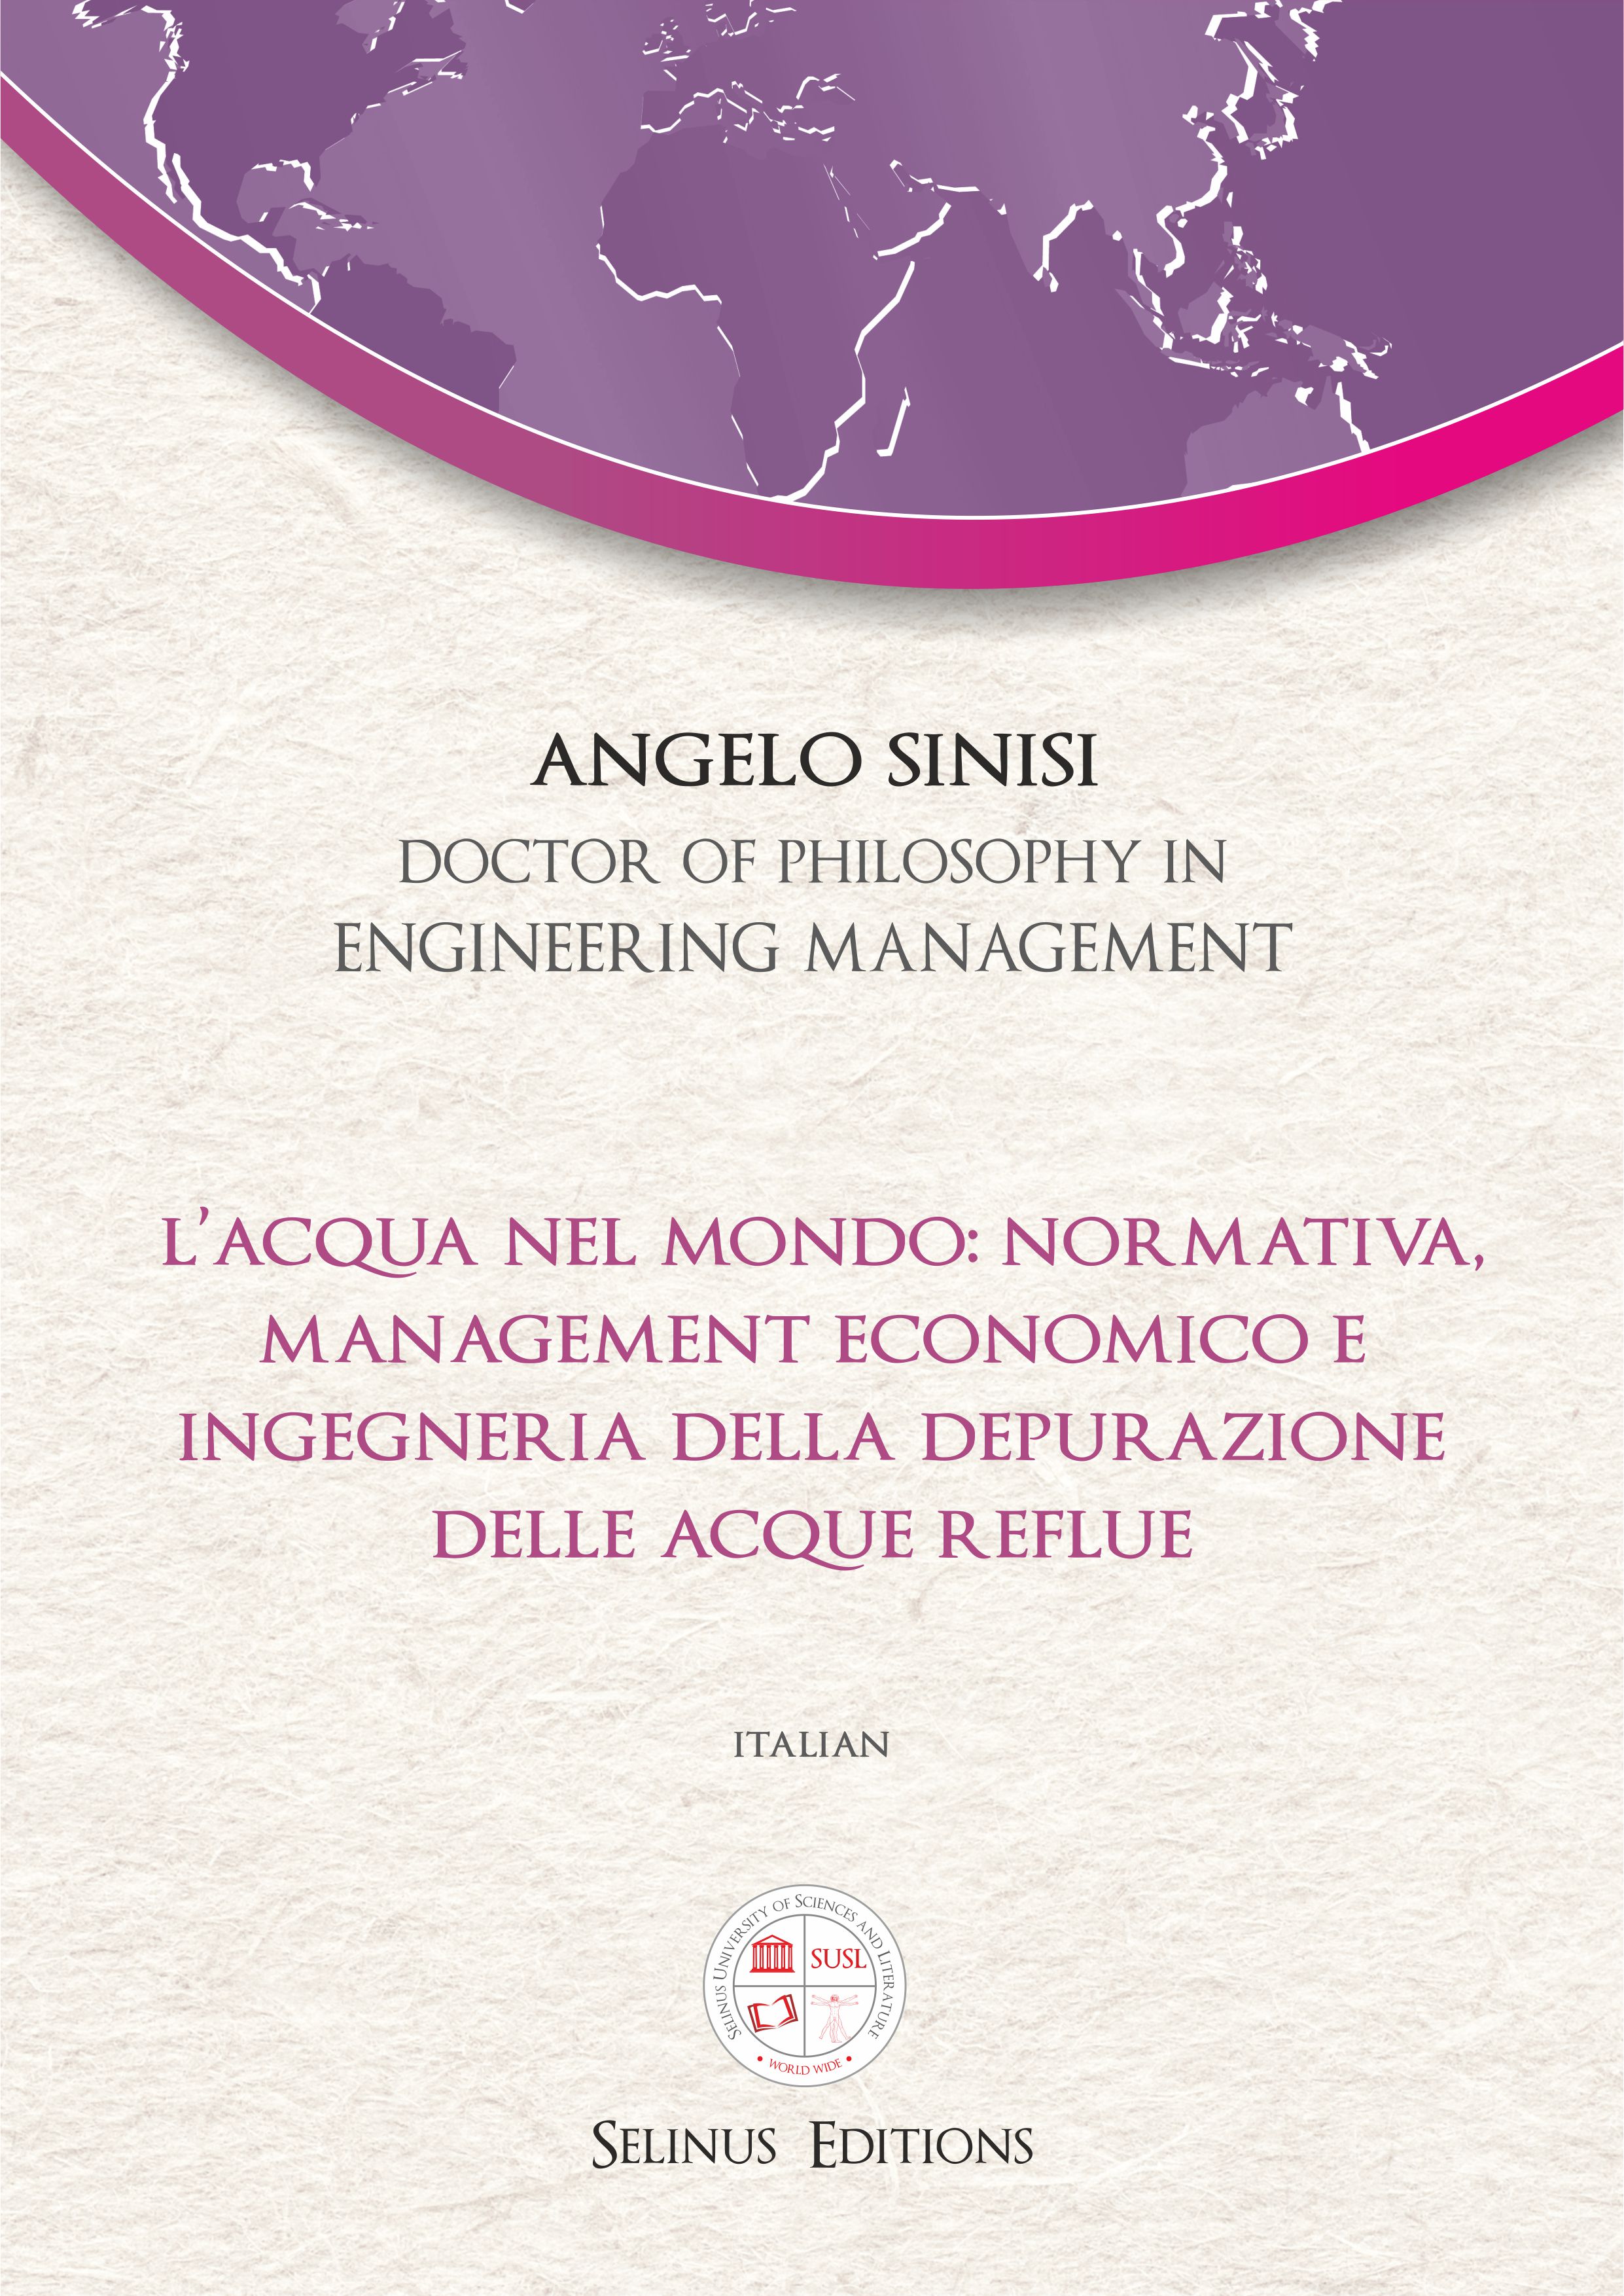 Thesis Angelo Sinisi